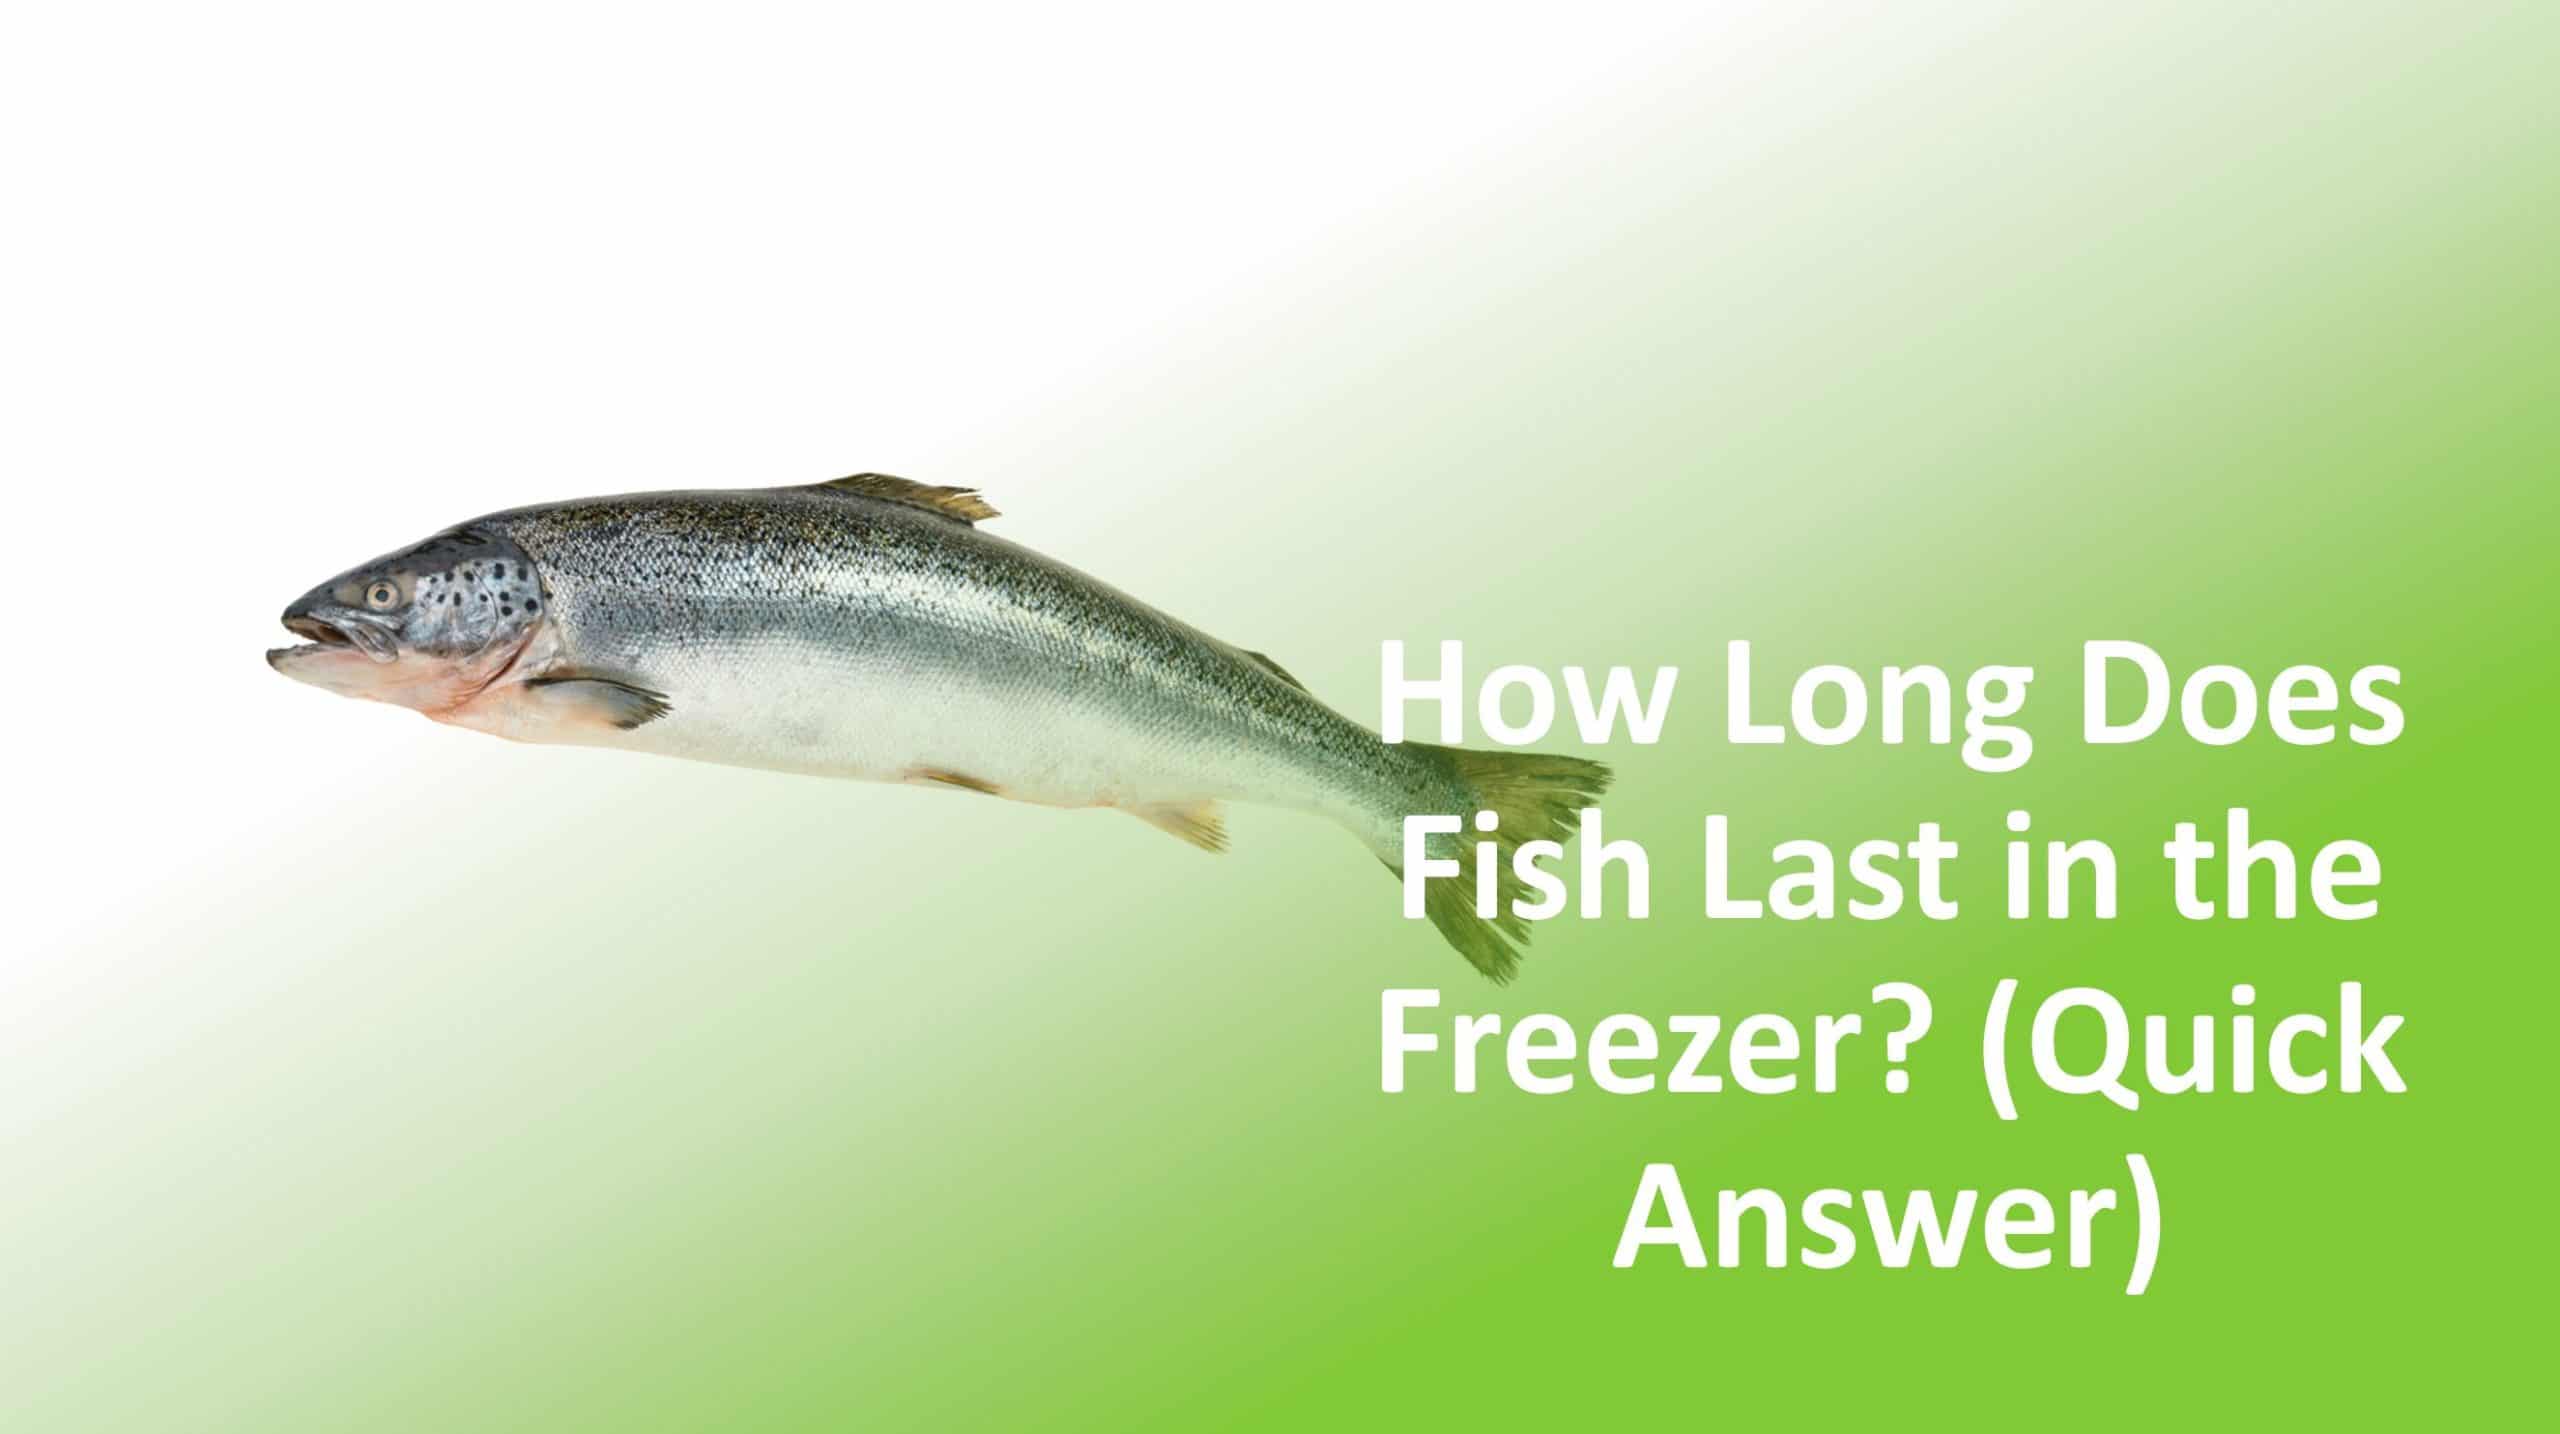 How Long Does Fish Last in the Freezer? (Quick Answer)